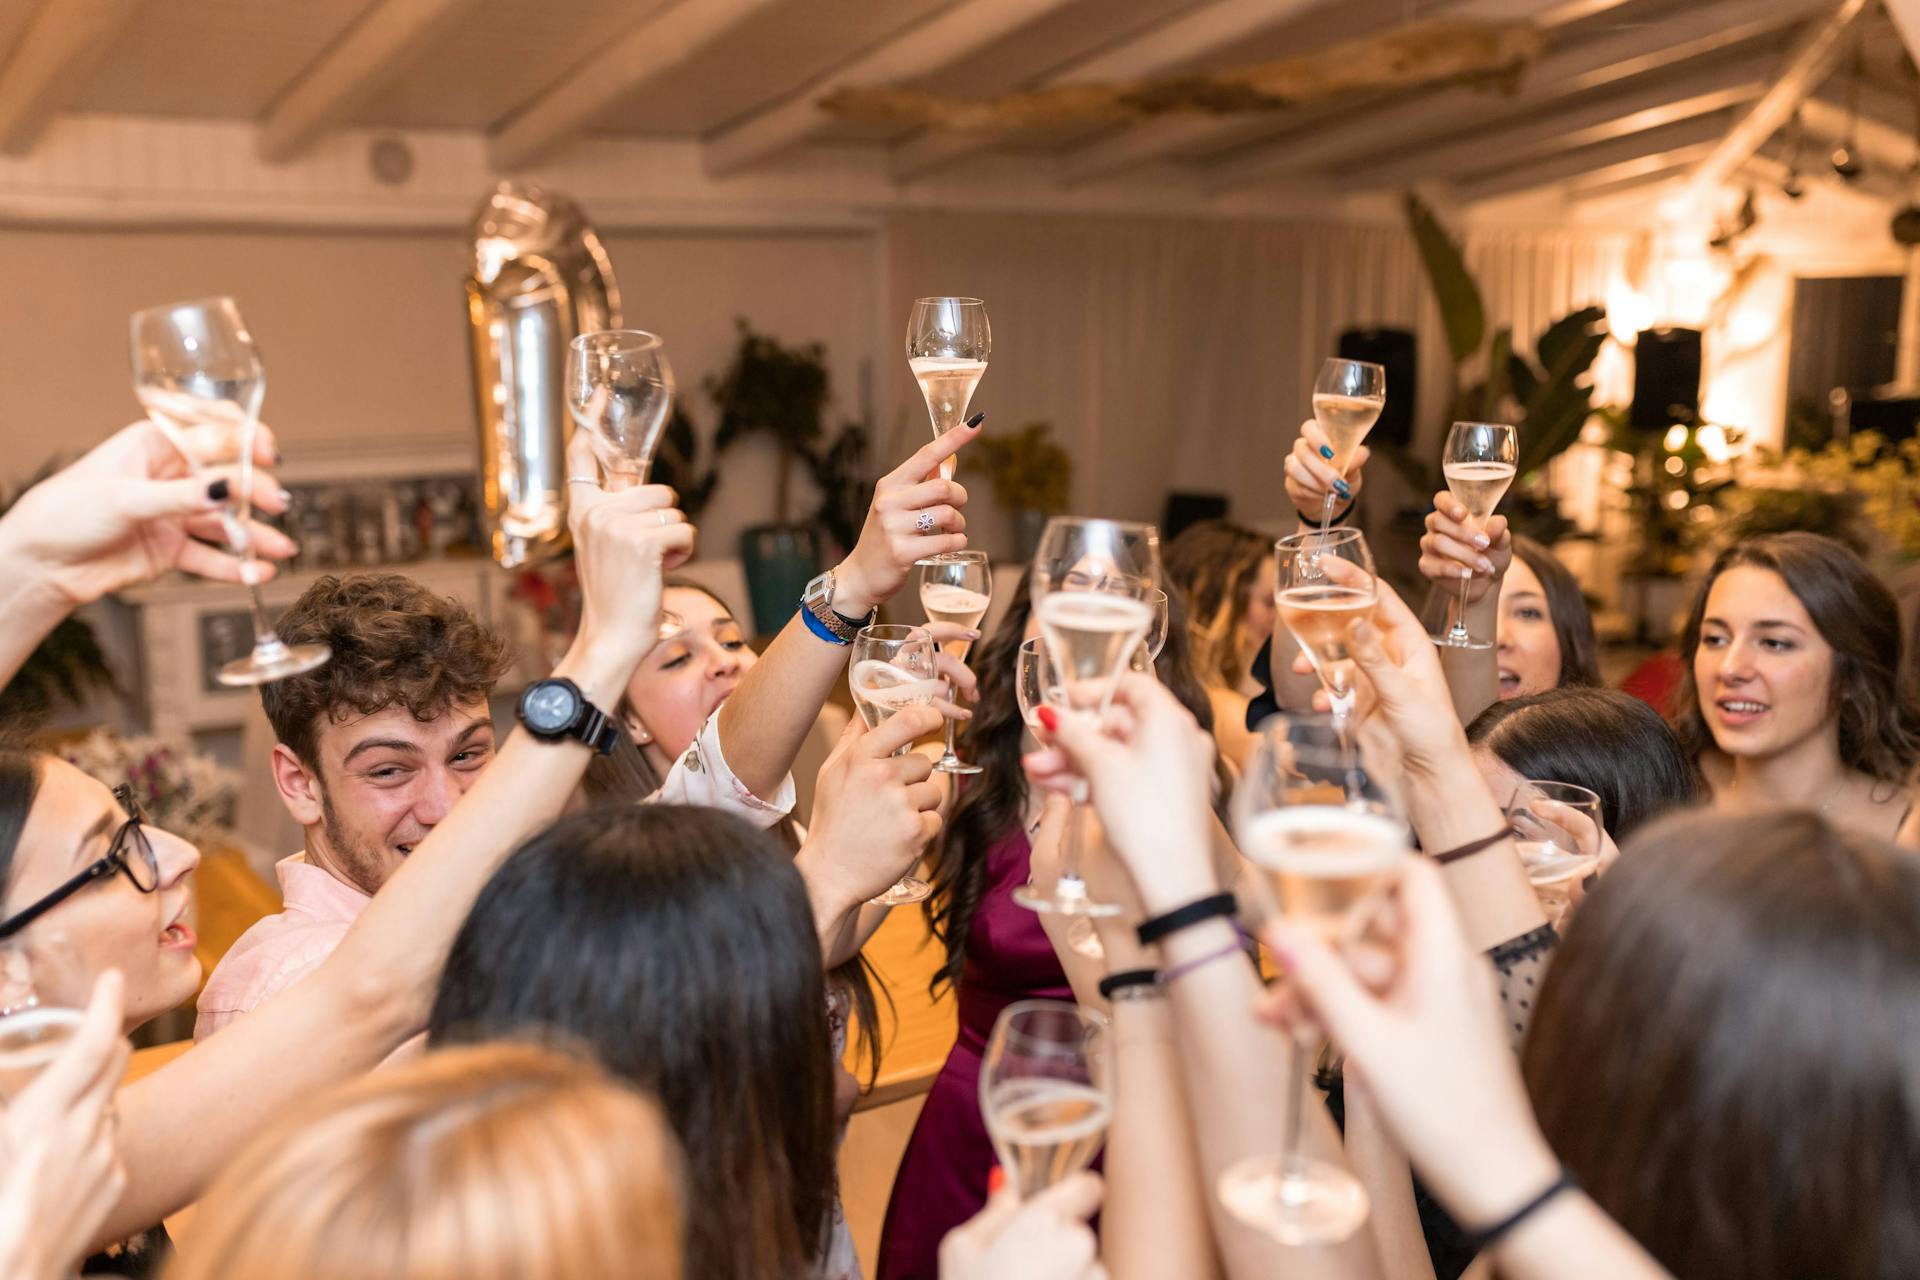 Young men and women raising their glasses of drink in a restaurant | Source: Pexels